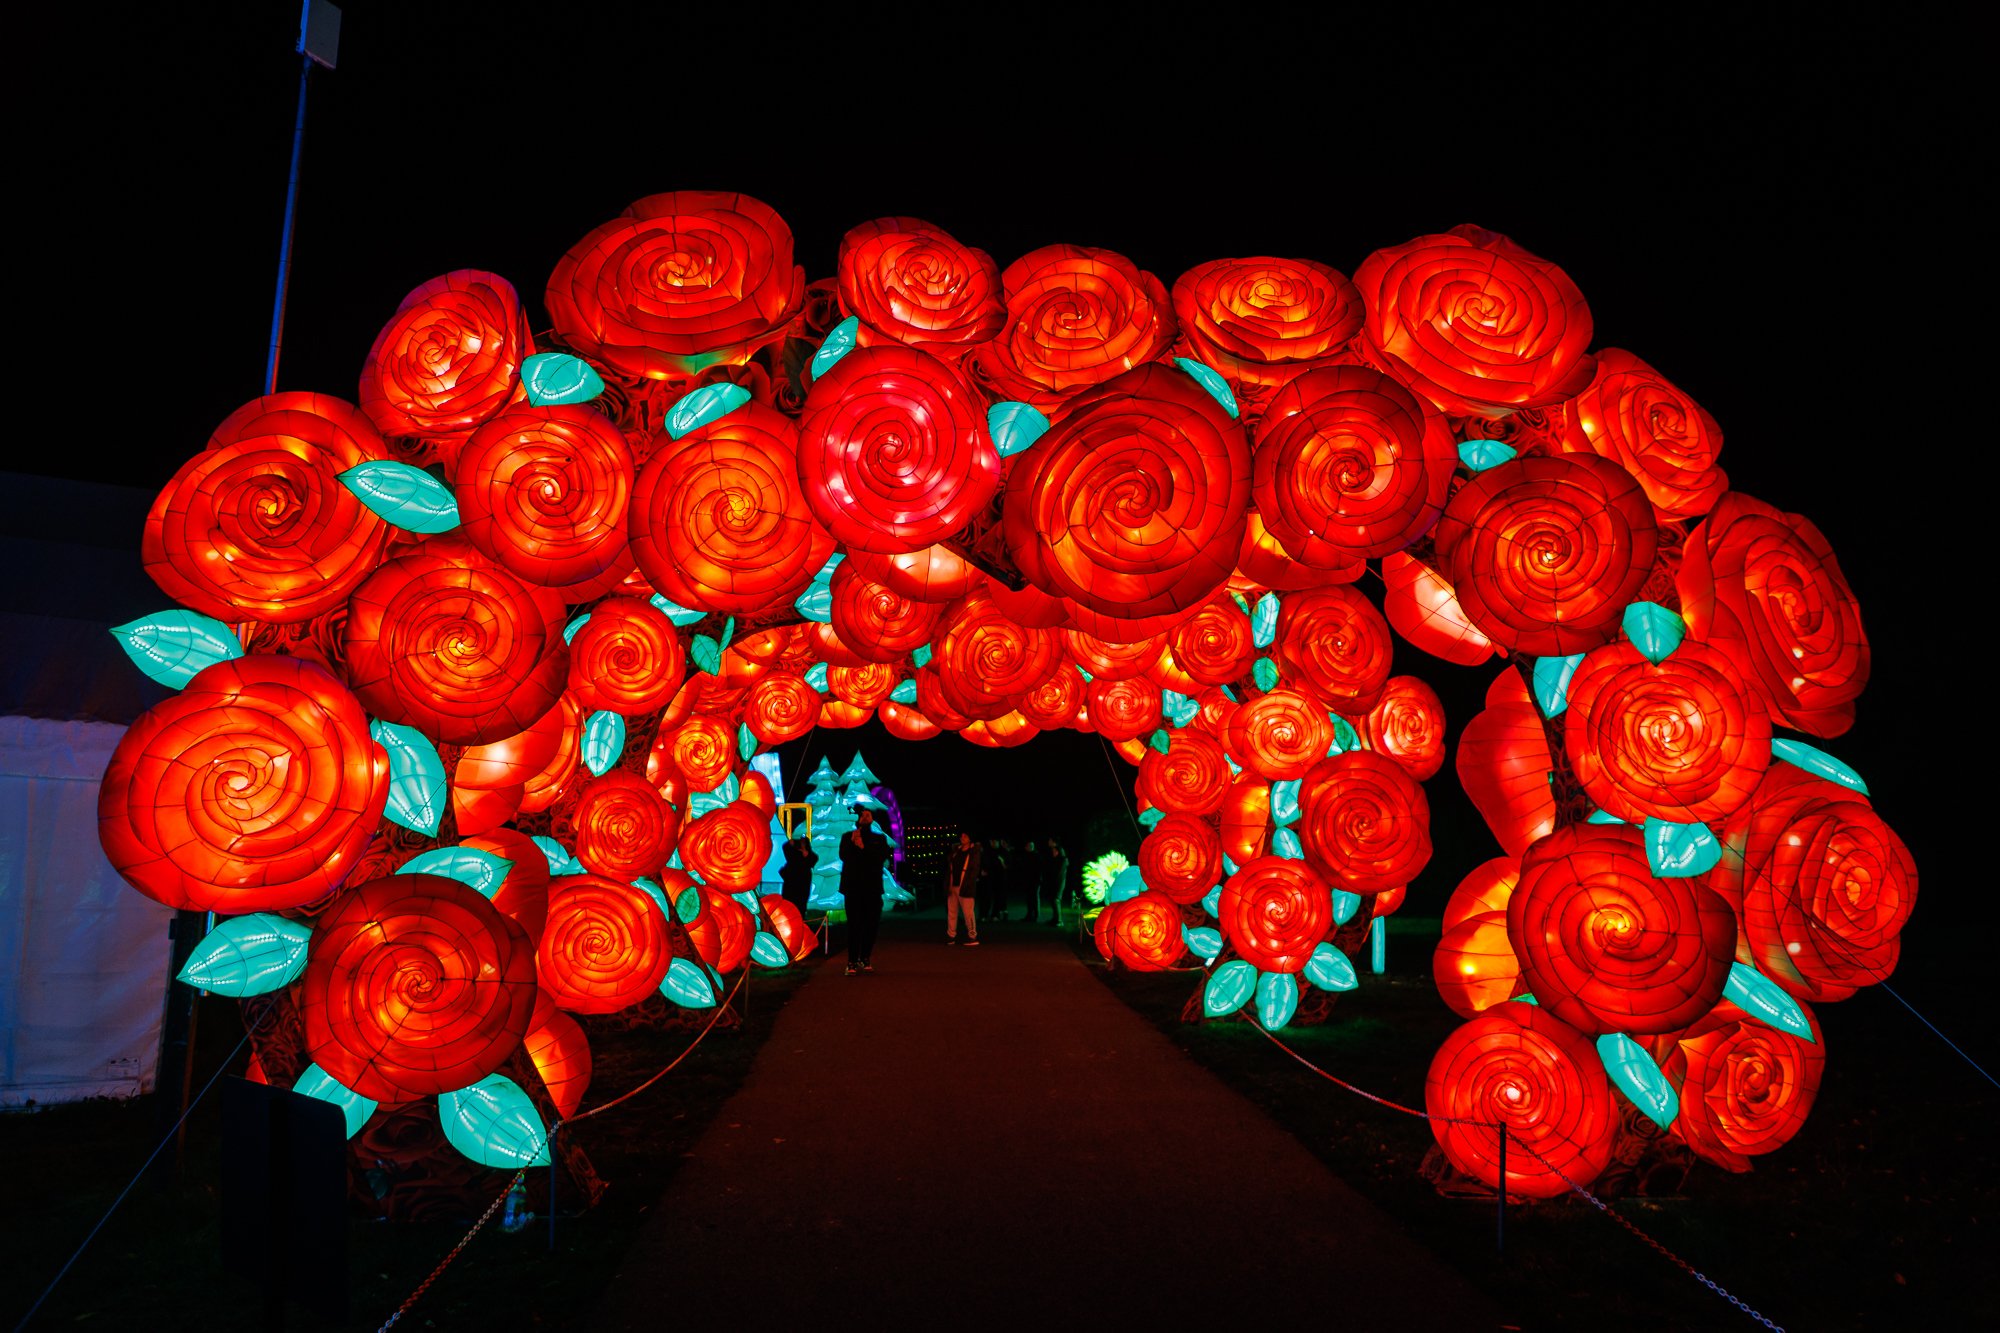 Feel the love at Land of Lights festival until 25th February